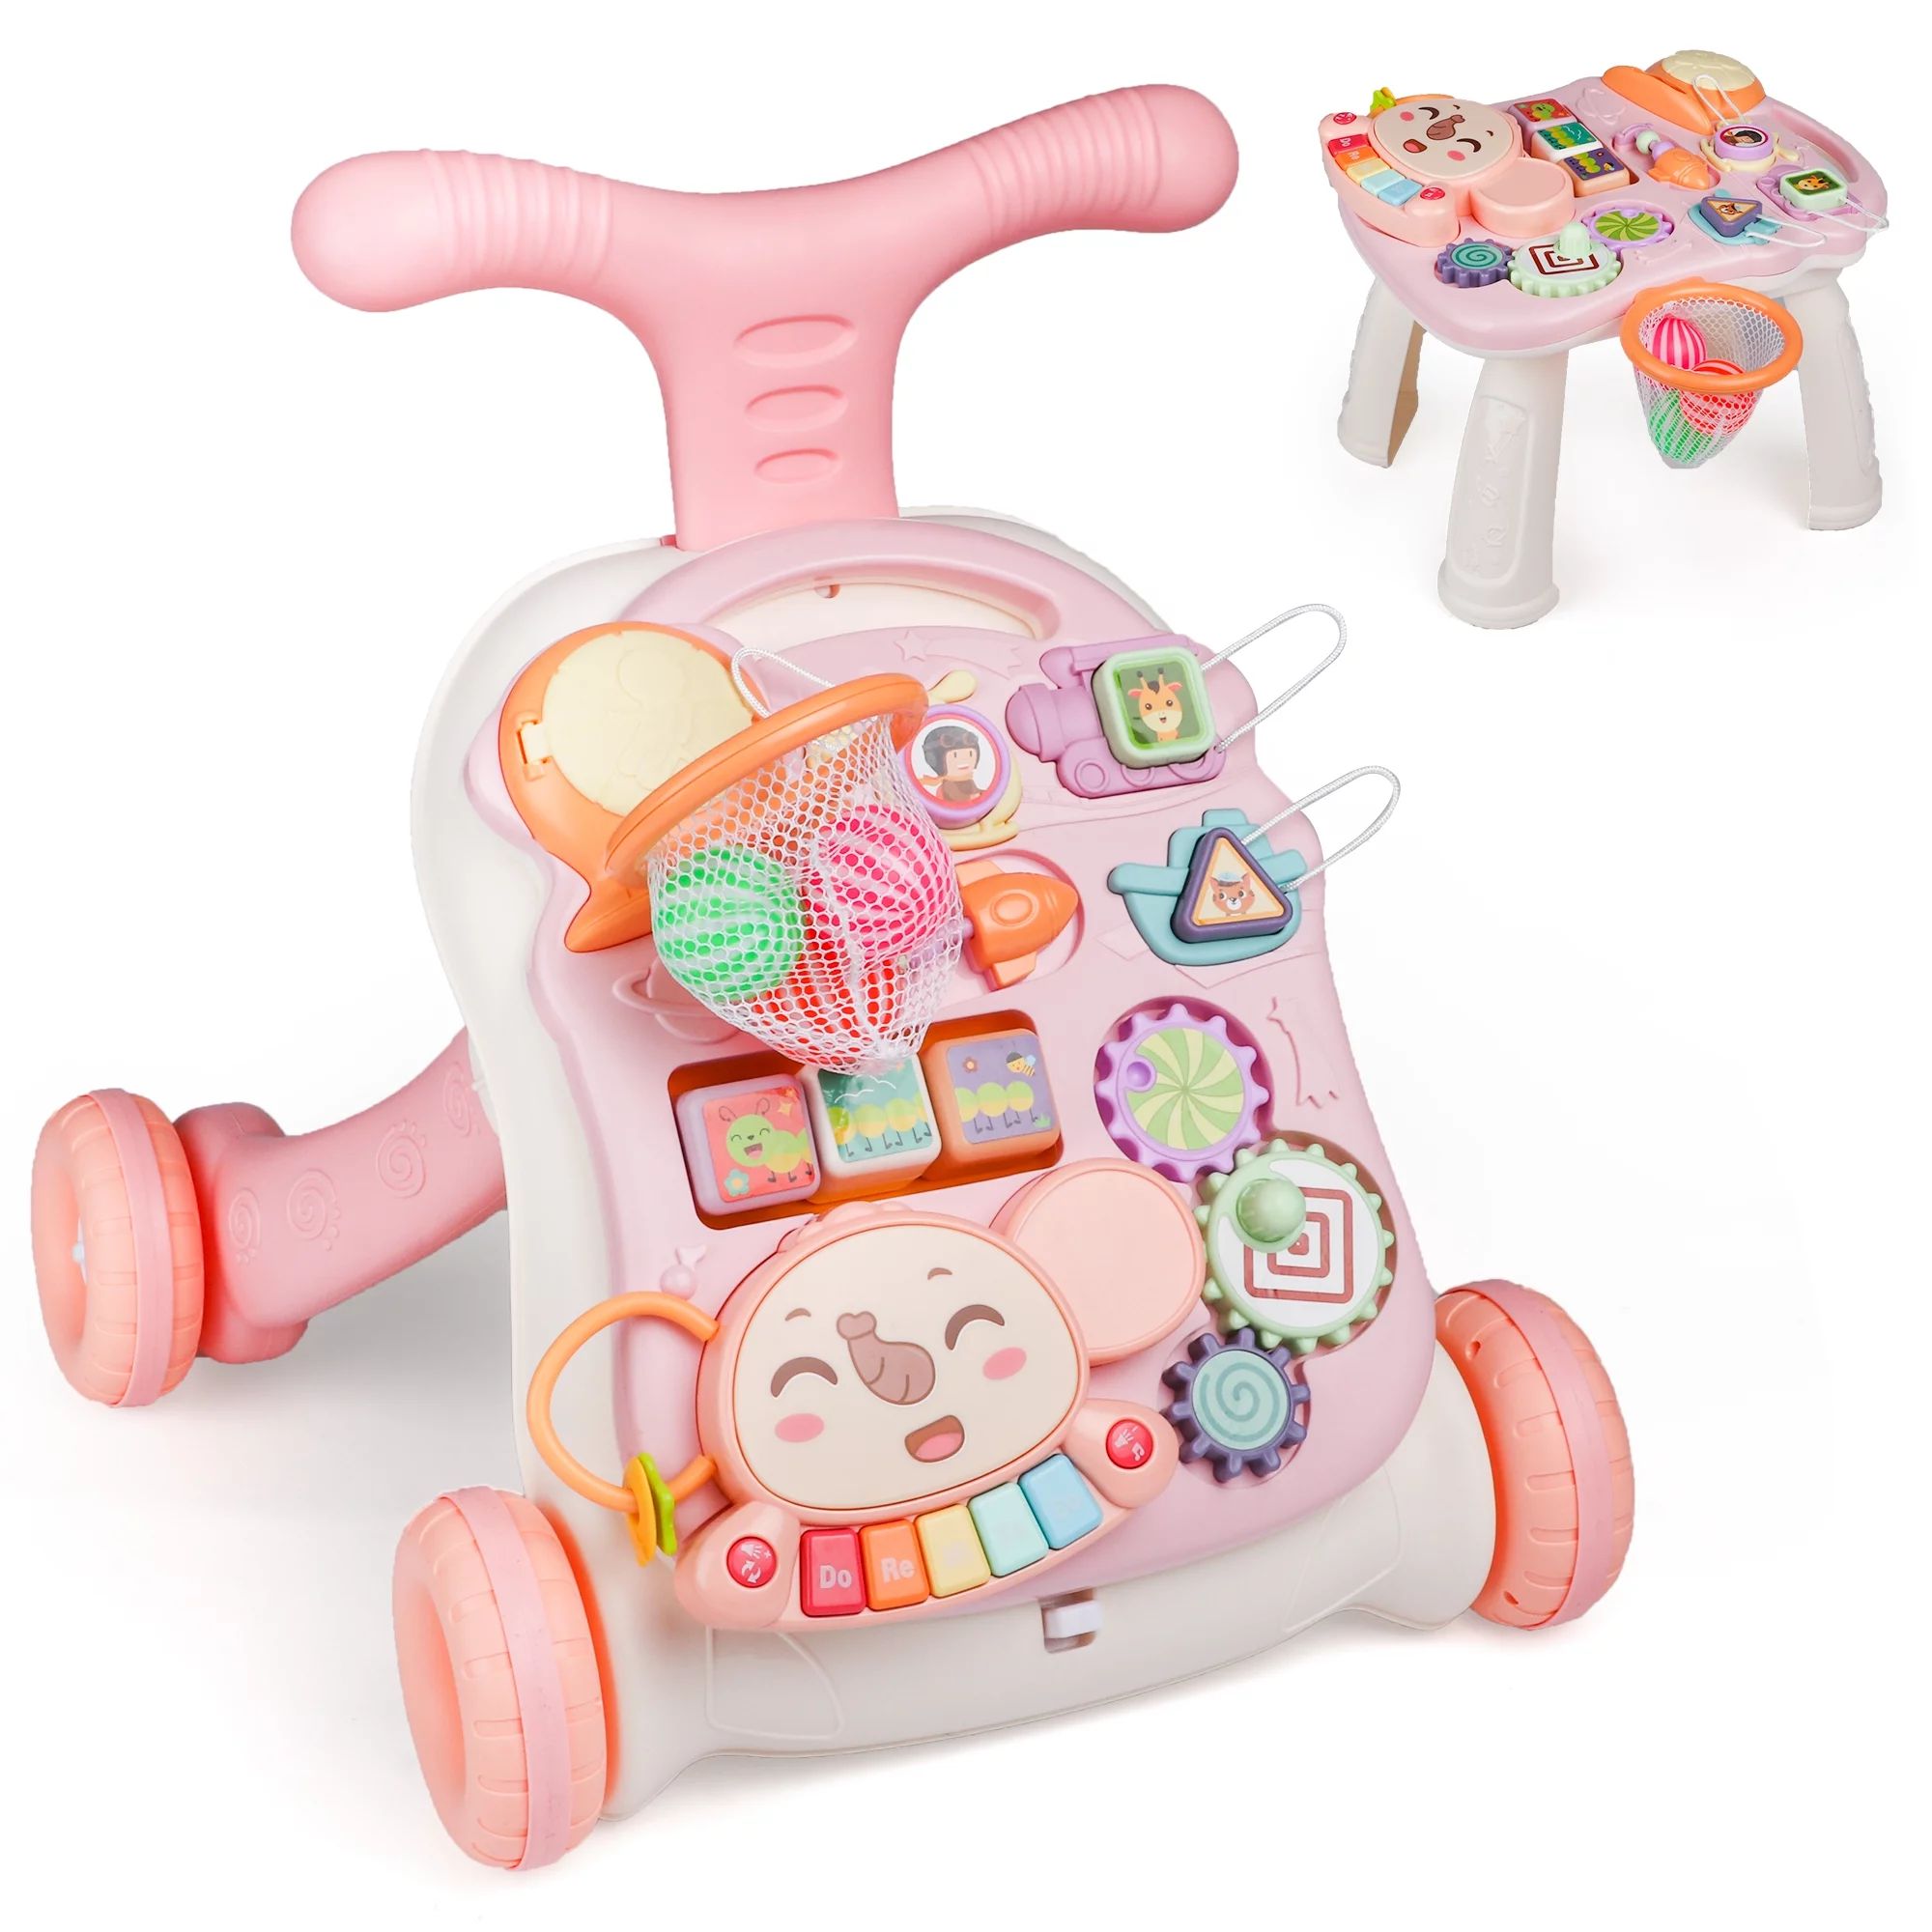 HopeRock Pink 3-in-1 Baby Walker&Activity Center&Learning Table for Girls 6 Months+, Best First B... | Walmart (US)